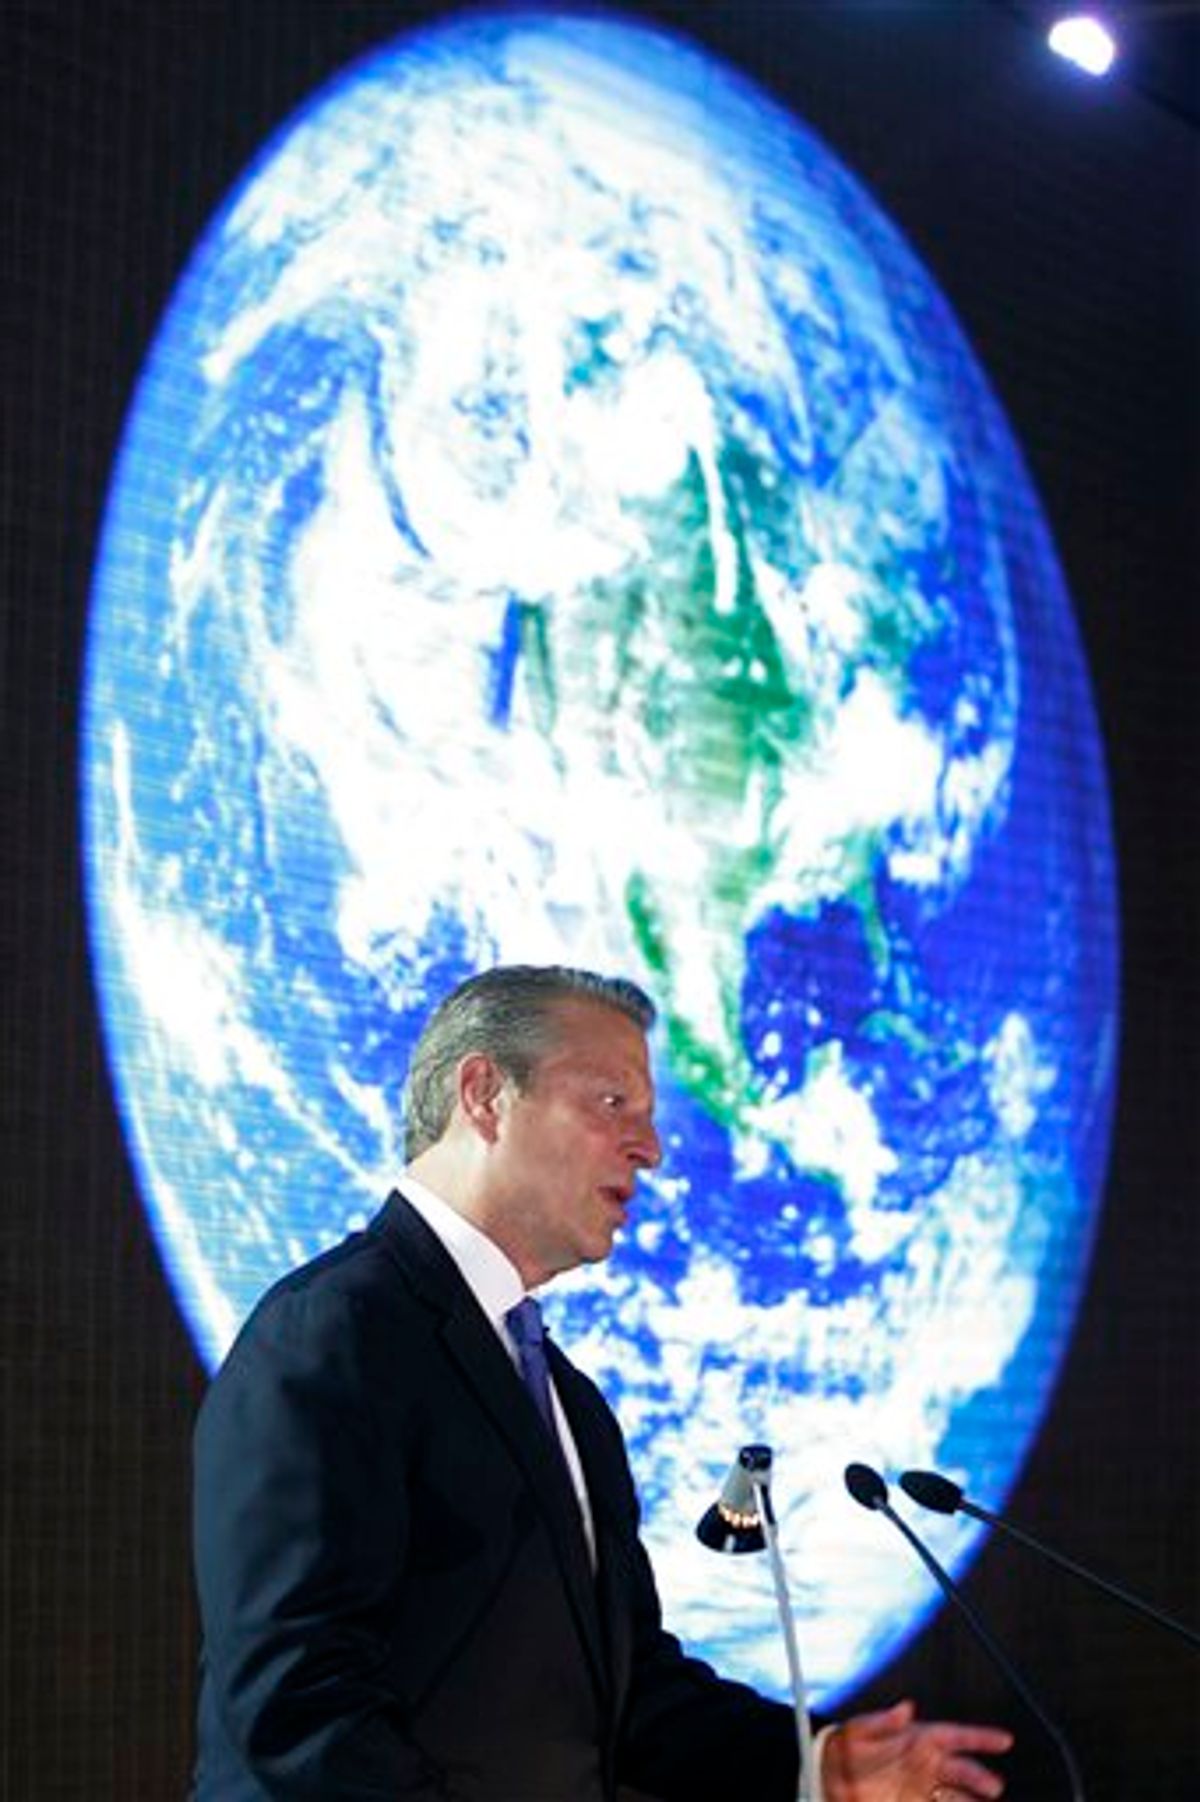 Former U.S. Vice President and environmentalist Al Gore talks about climate change in Manila, Philippines on Tuesday, June 8, 2010. Gore presented his updated Asian version of "An Inconvenient Truth" to his mostly Filipino audience. (AP Photo/Aaron Favila) (AP)